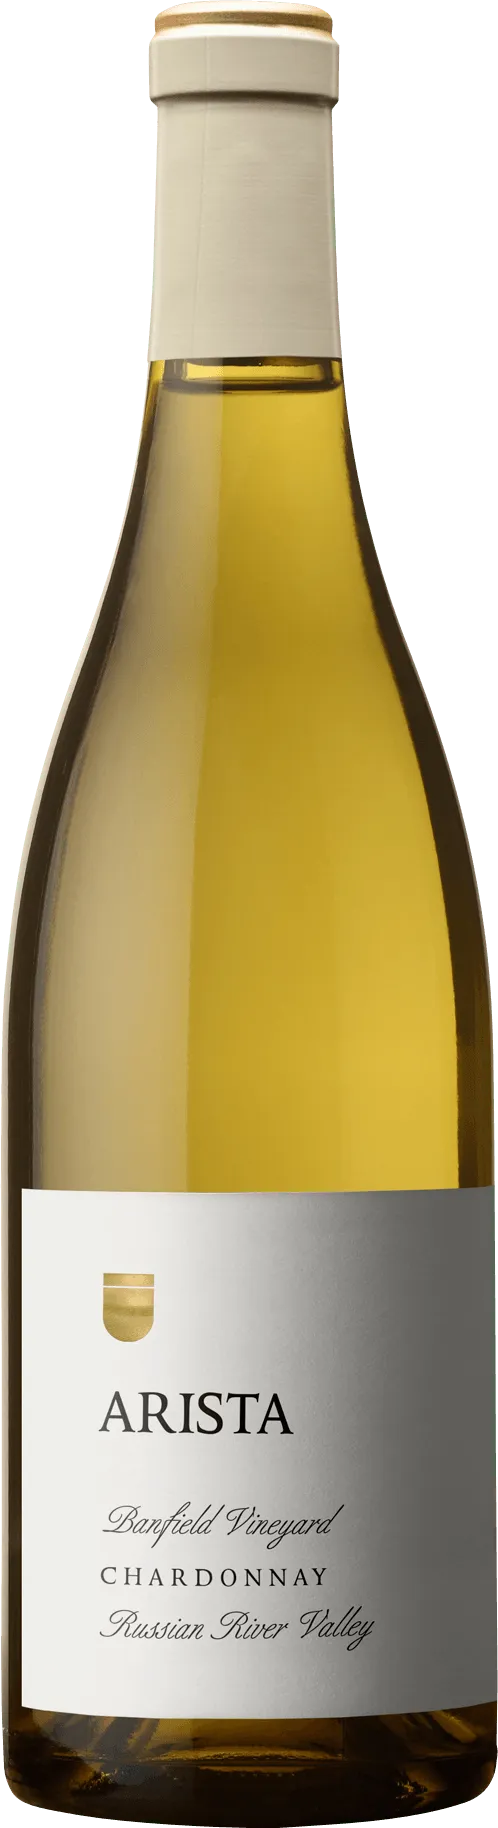 Bottle of Arista Banfield Vineyard Chardonnay from search results